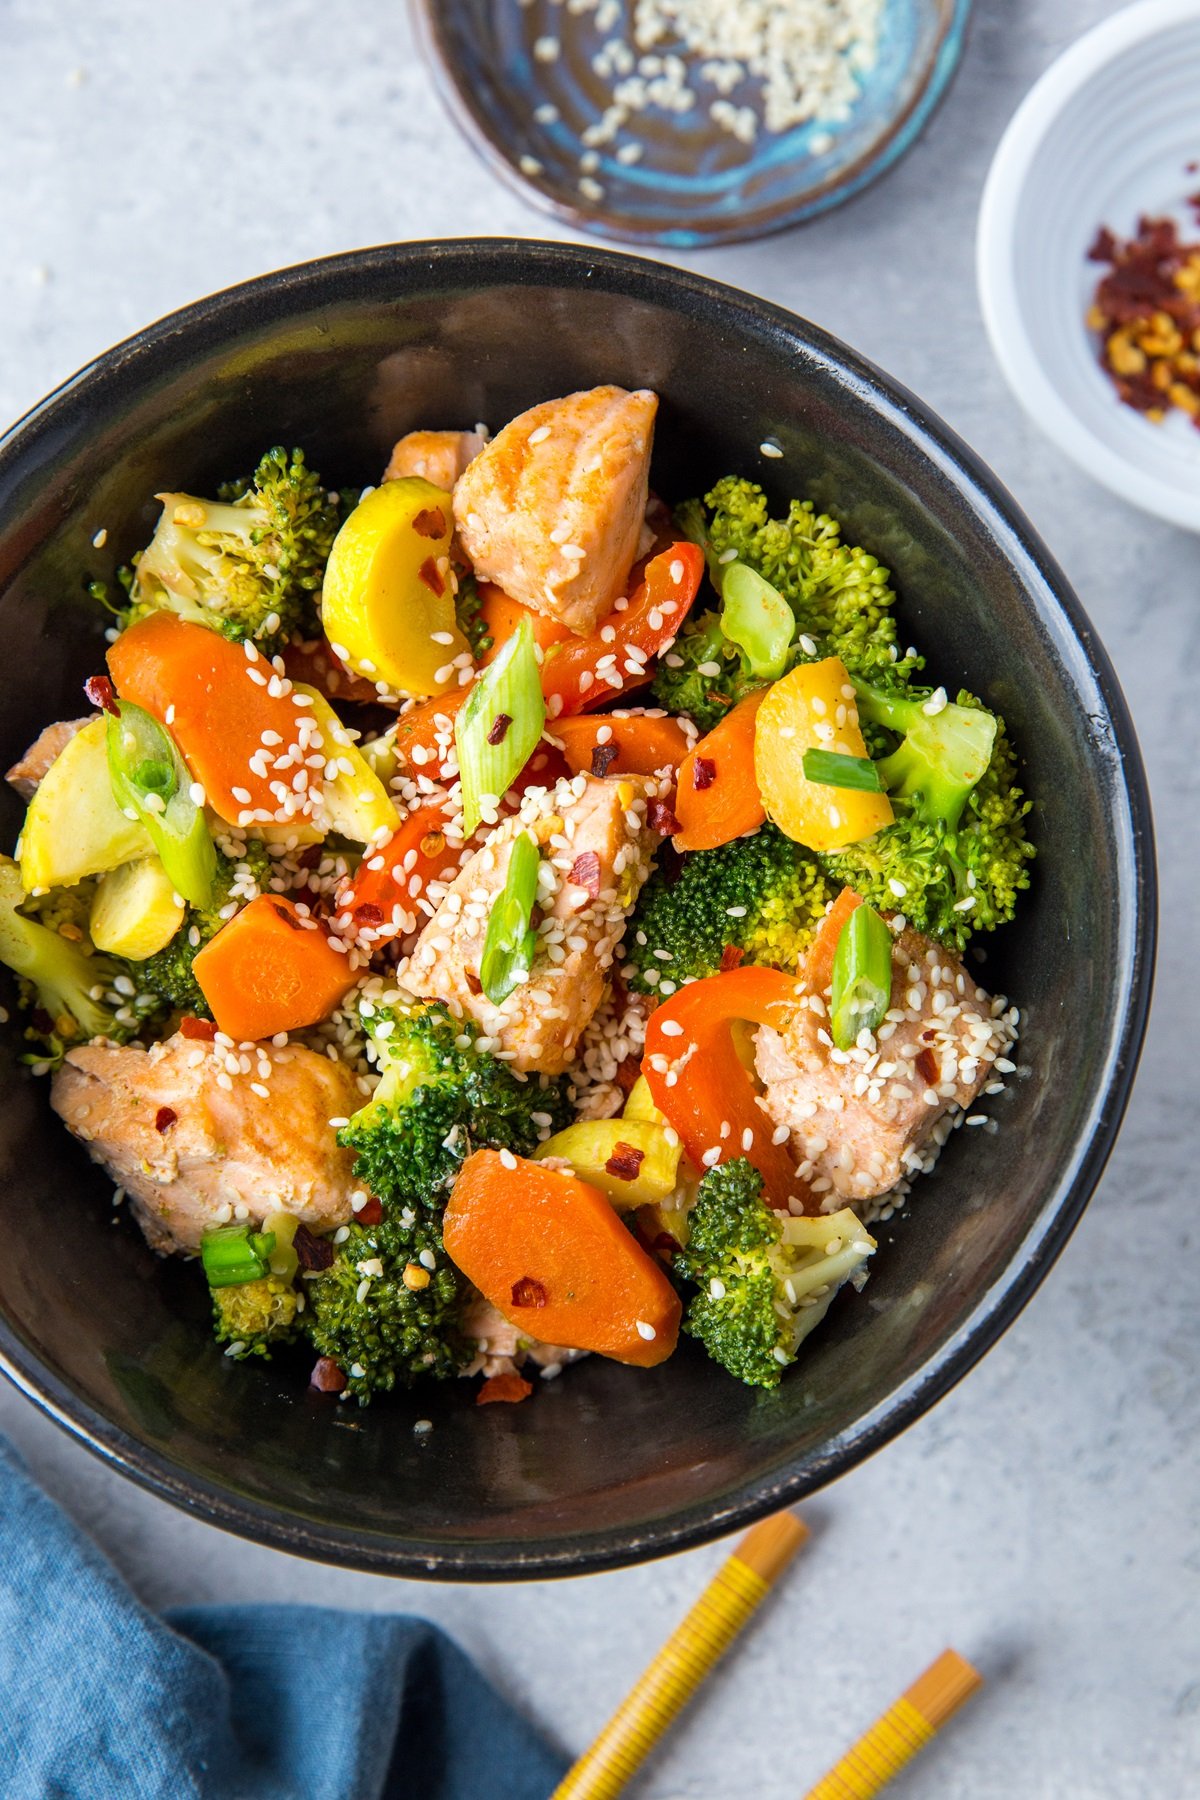 Salmon Stir Fry with Vegetables - an easy paleo, keto, whole30 dinner recipe that only requires 30 minutes to make! | TheRoastedRoot.net #glutenfree